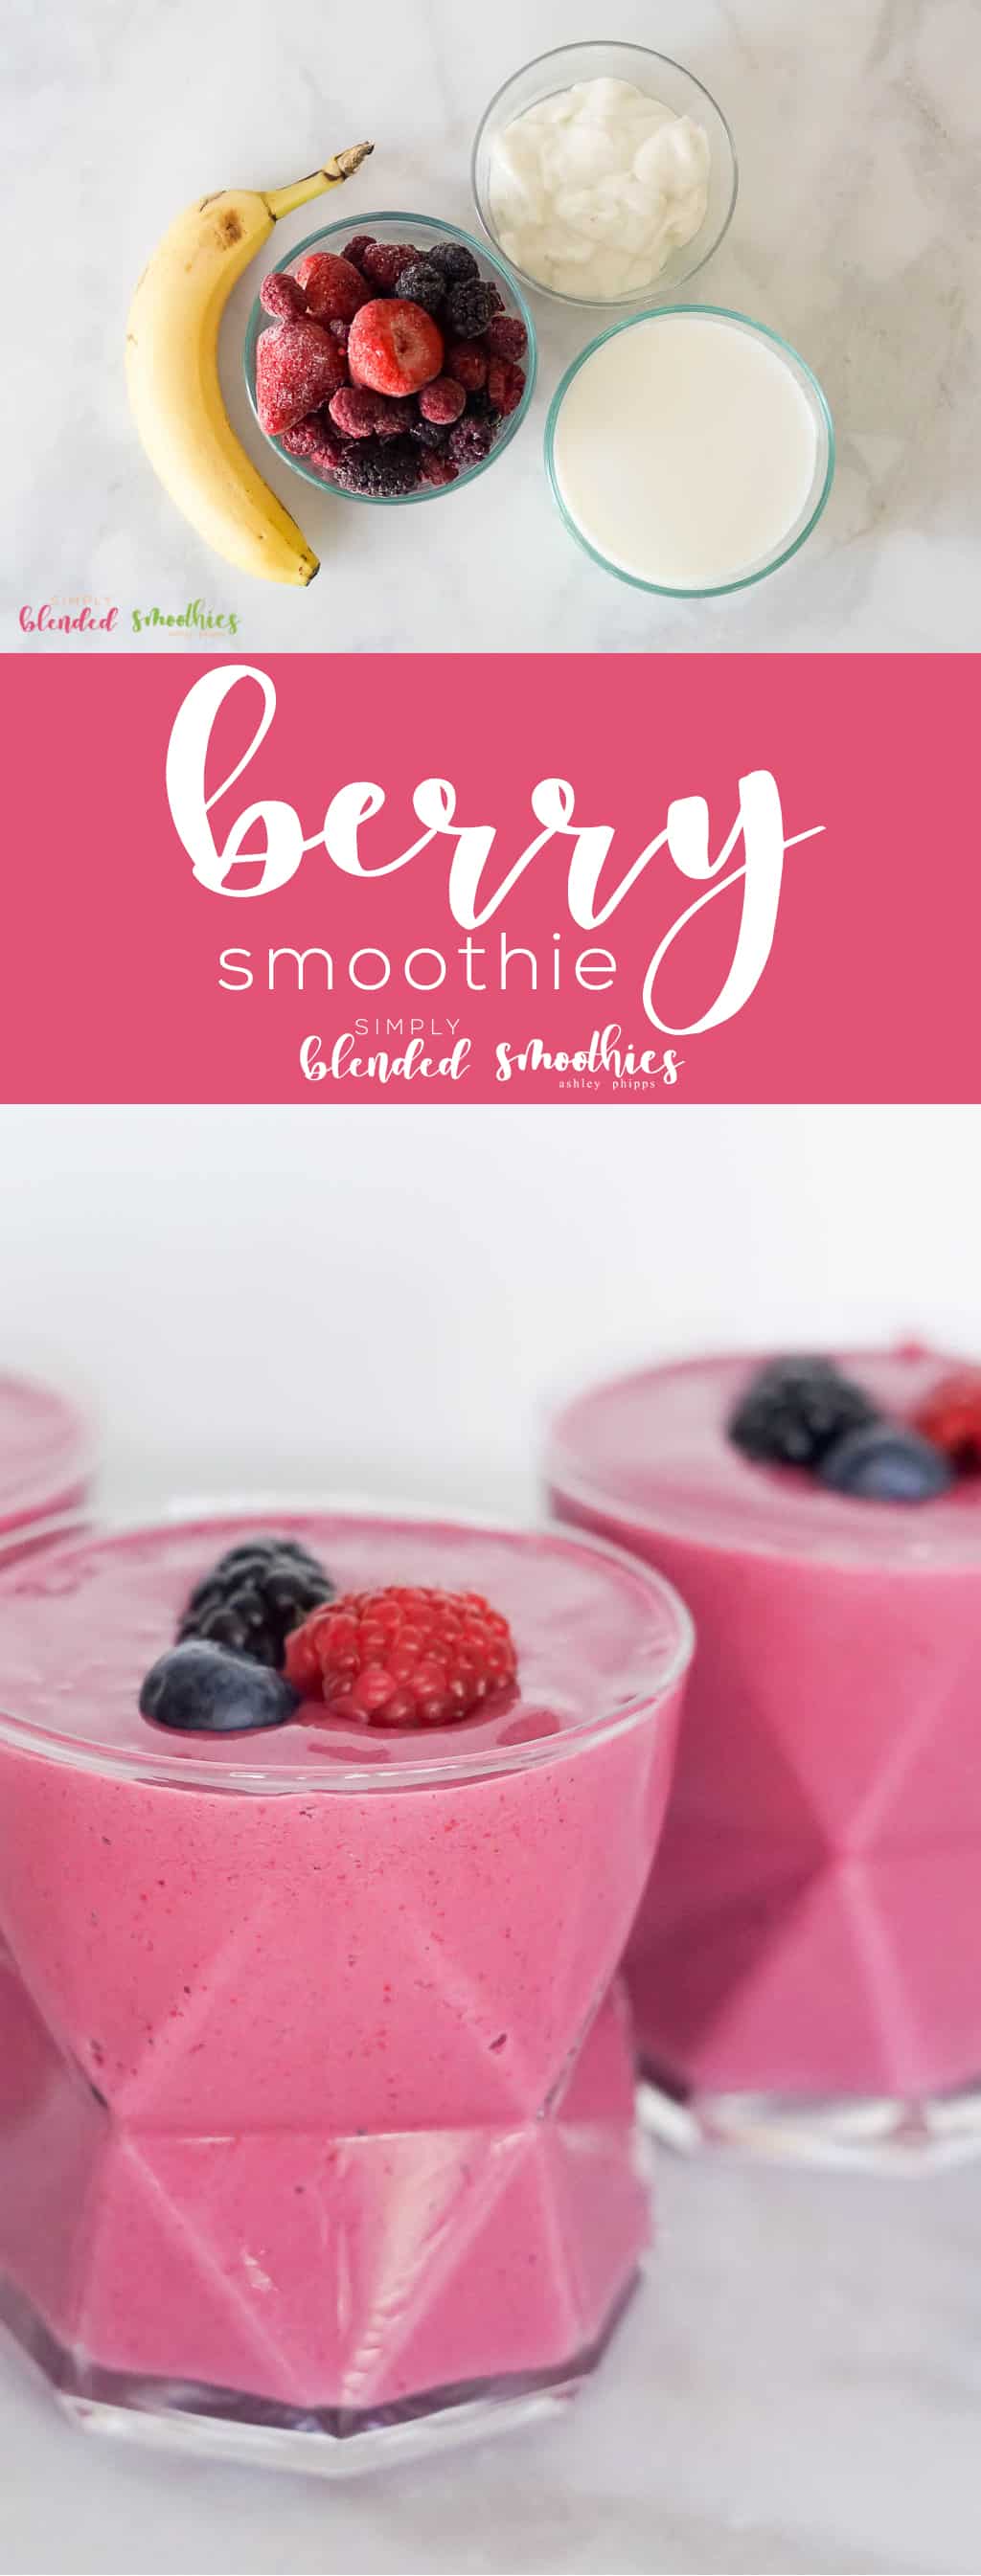 This Delicious Berry Smoothie Recipe Is The Perfect Sweet Smoothie Recipe That Is Healthy And A Hit With The Whole Family